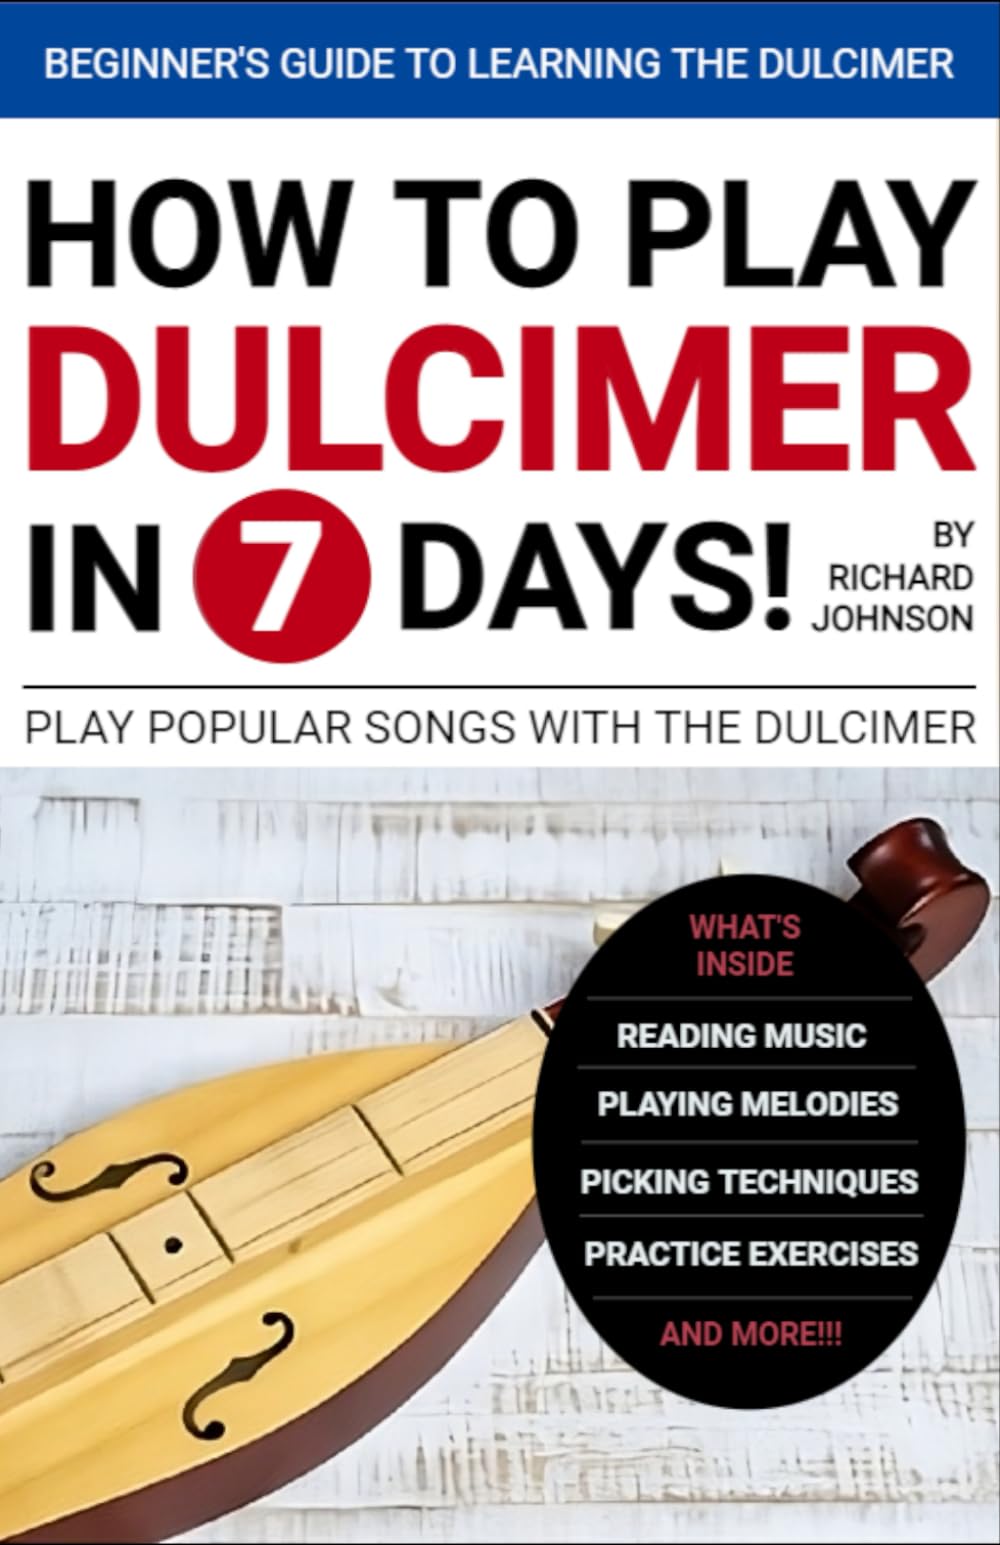 How to Play The Dulcimer in 7 Days: Learn Mountain Dulcimer Music For Beginners (Play Appalachian Mountain Dulcimer Songs in 7 Days)